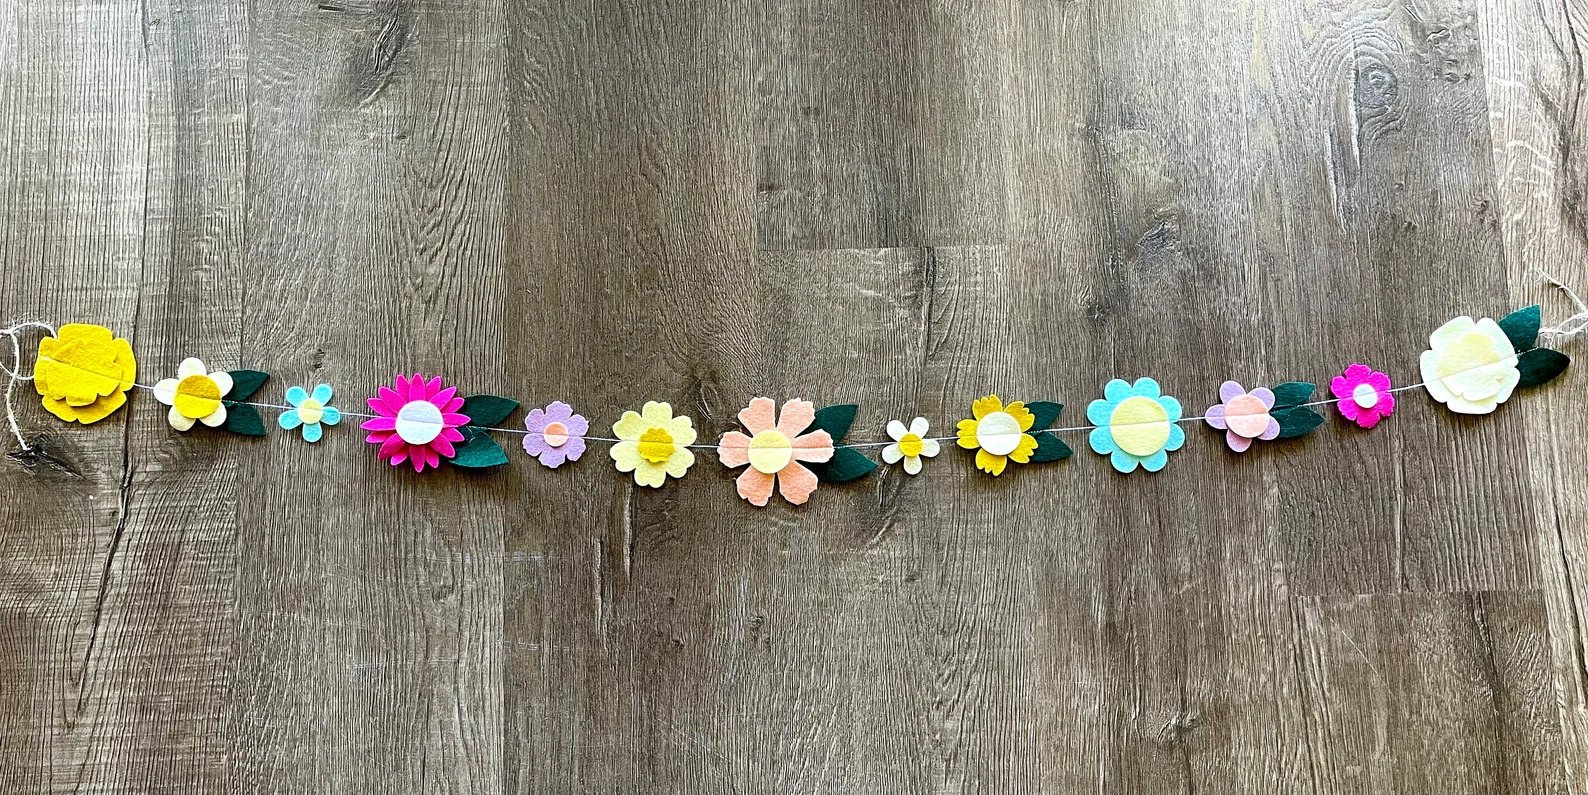 15 Festive Spring Garlands to Celebrate the Season in Style